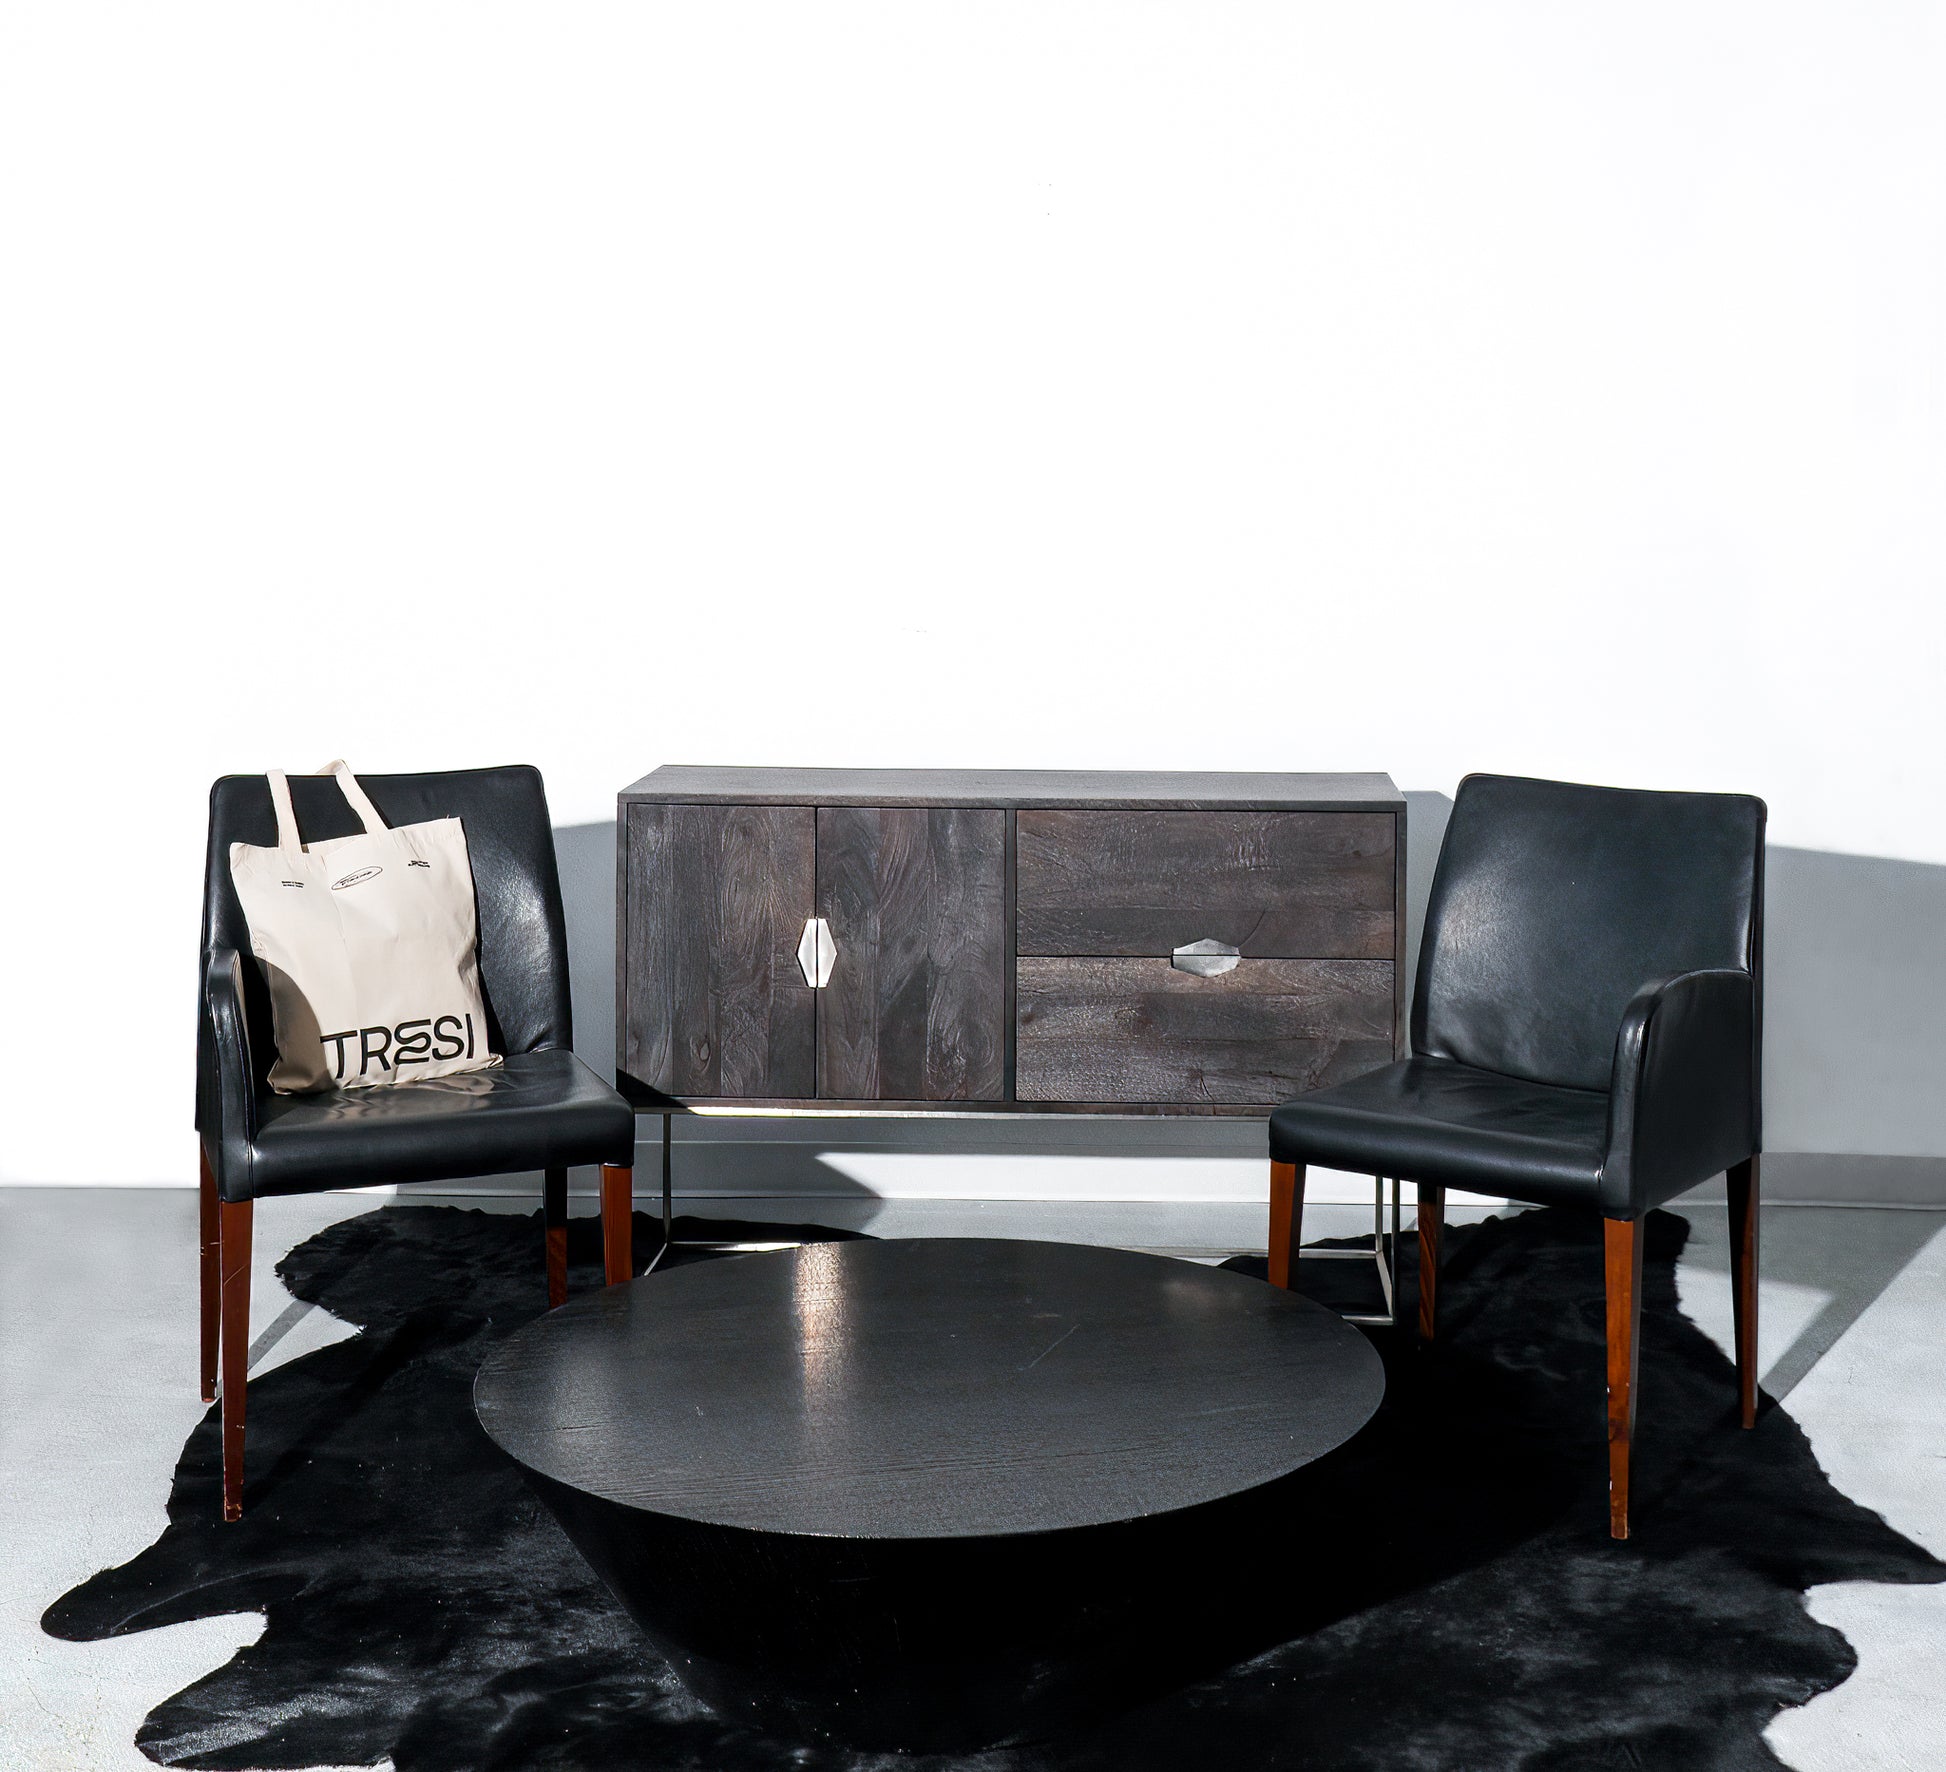 Pair of black leather chairs that converts into a loveseat when placed together